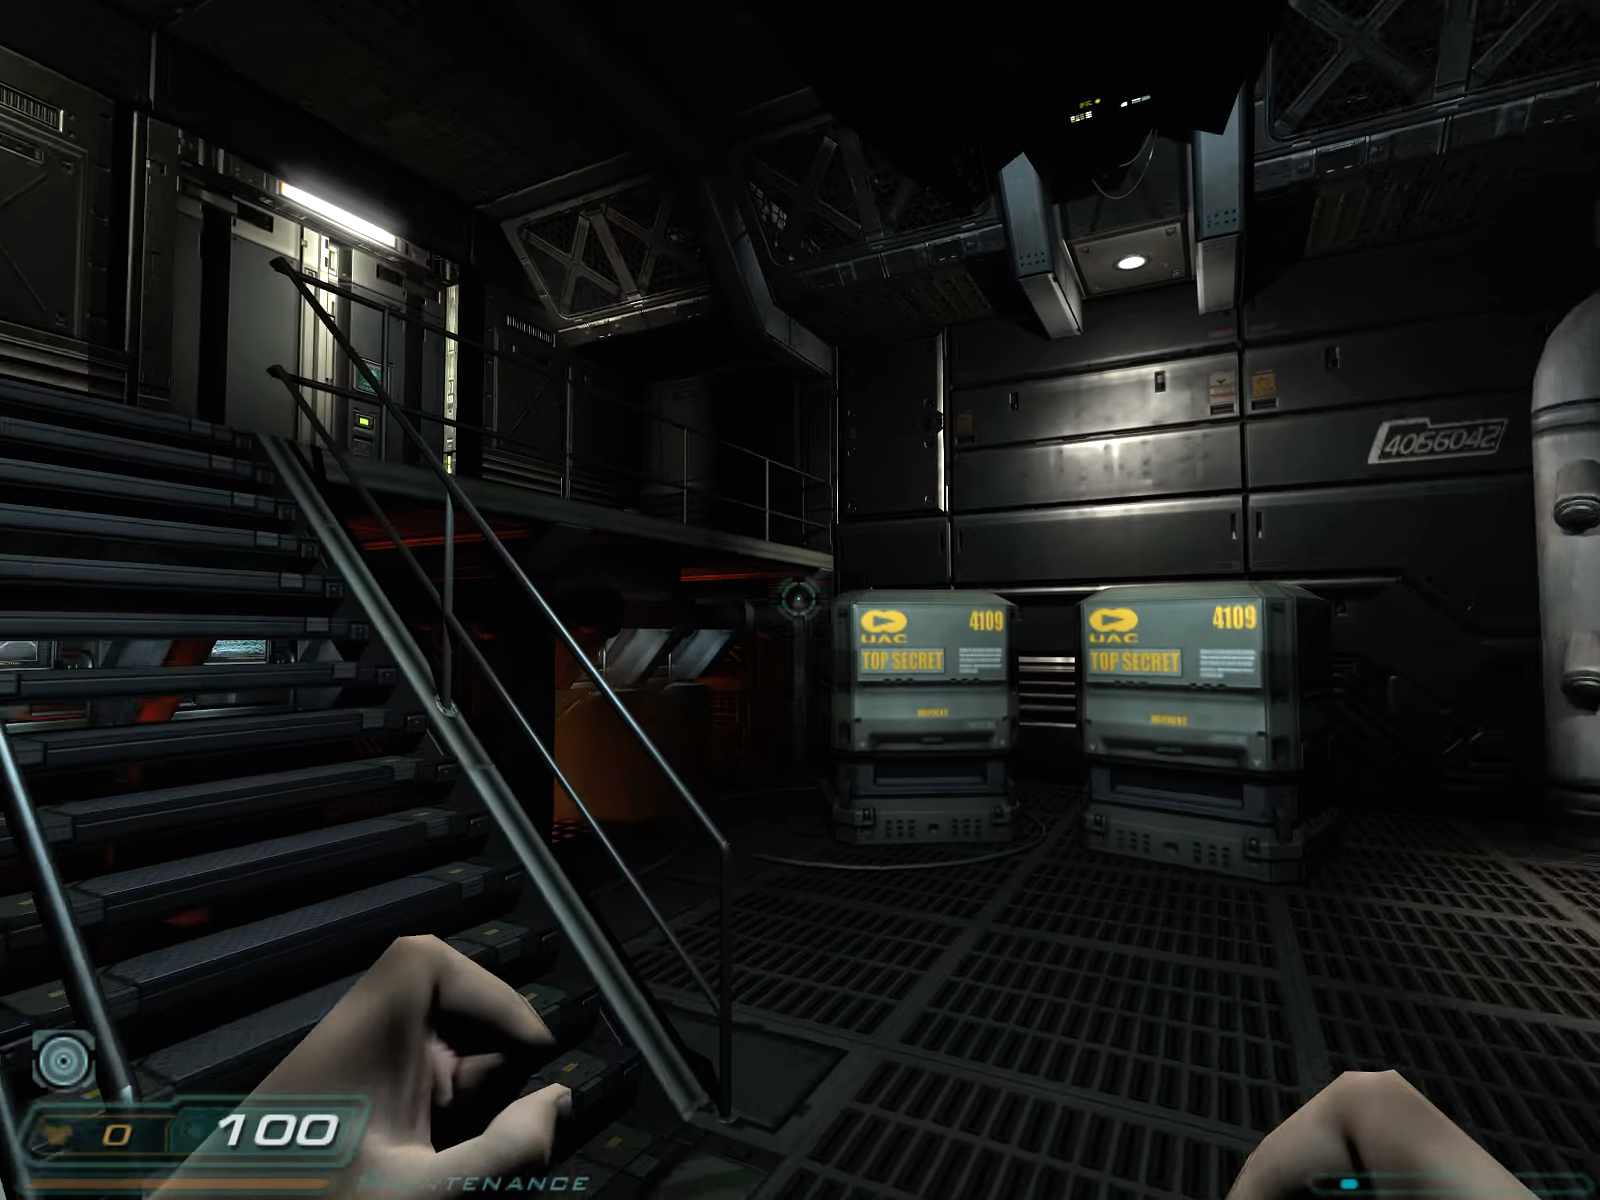 Media asset in full size related to 3dfxzone.it news item entitled as follows: YouTube Gameplay Footage: DOOM 3 | 1080p | 8x AA & 16x Aniso | Image Name: news34452_Doom-3_Screenshot_1.png